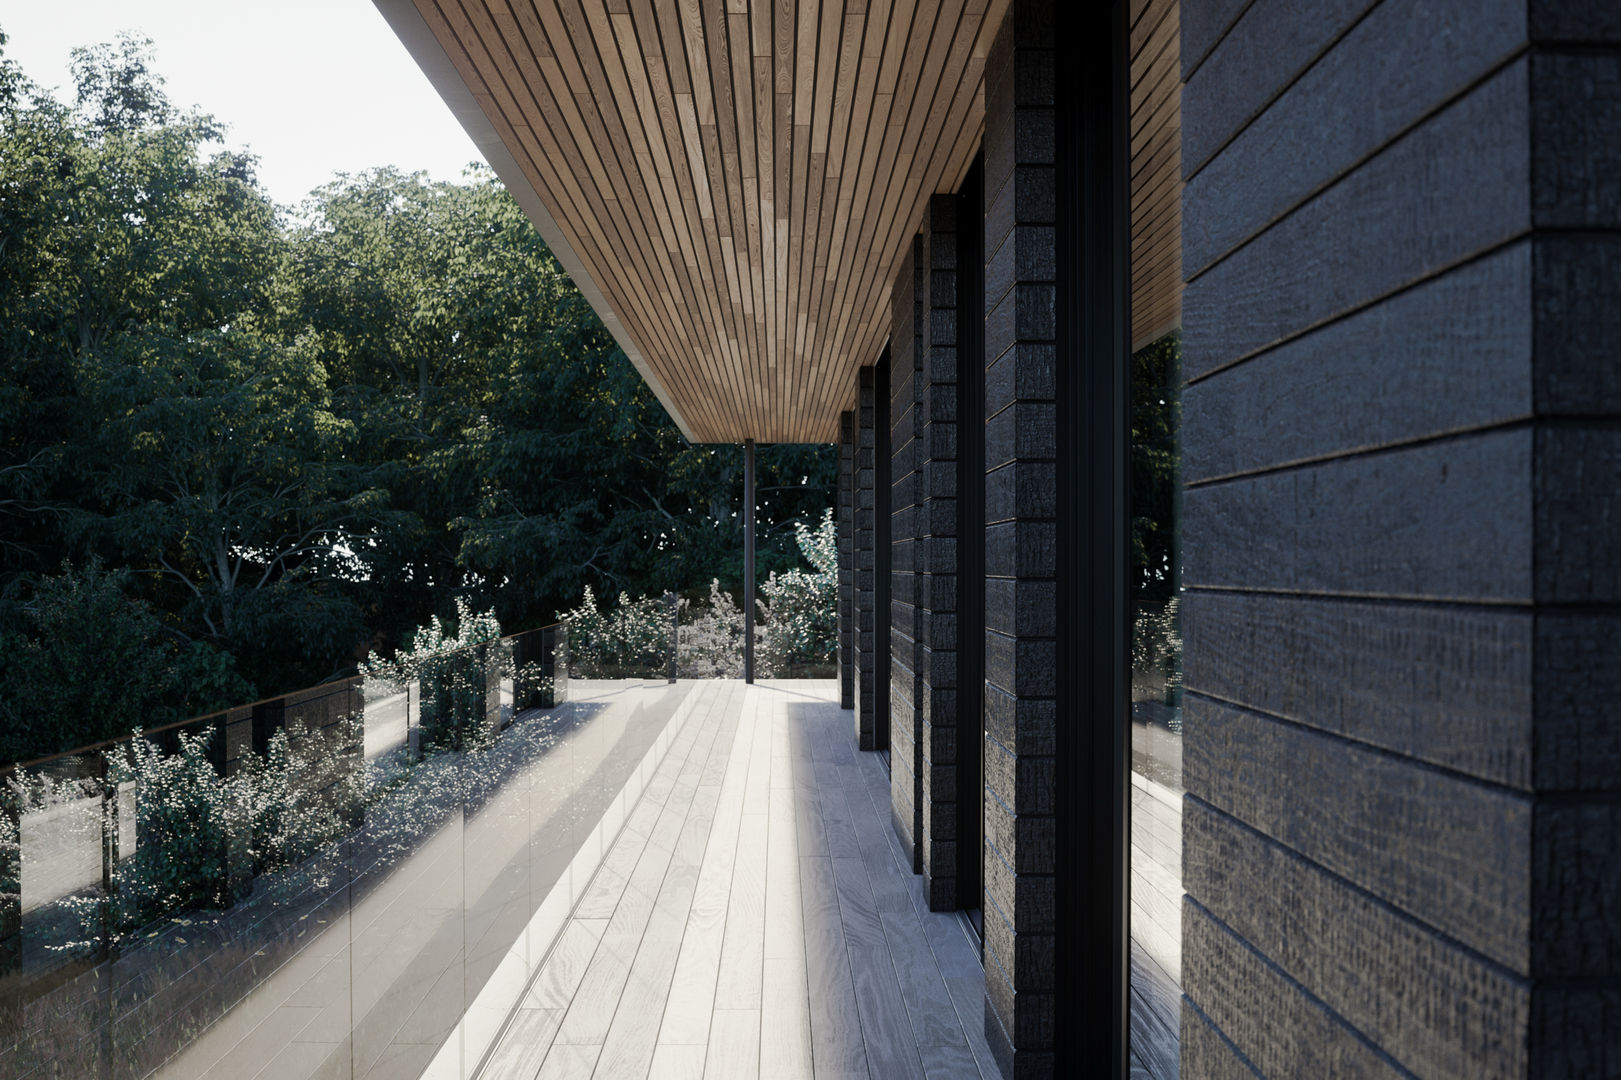 Covered terrace walkway deck homify Single family home ayrshire,contemporary,floating,glass,house,new house,scotland,stilts,timber,uk,walled garden